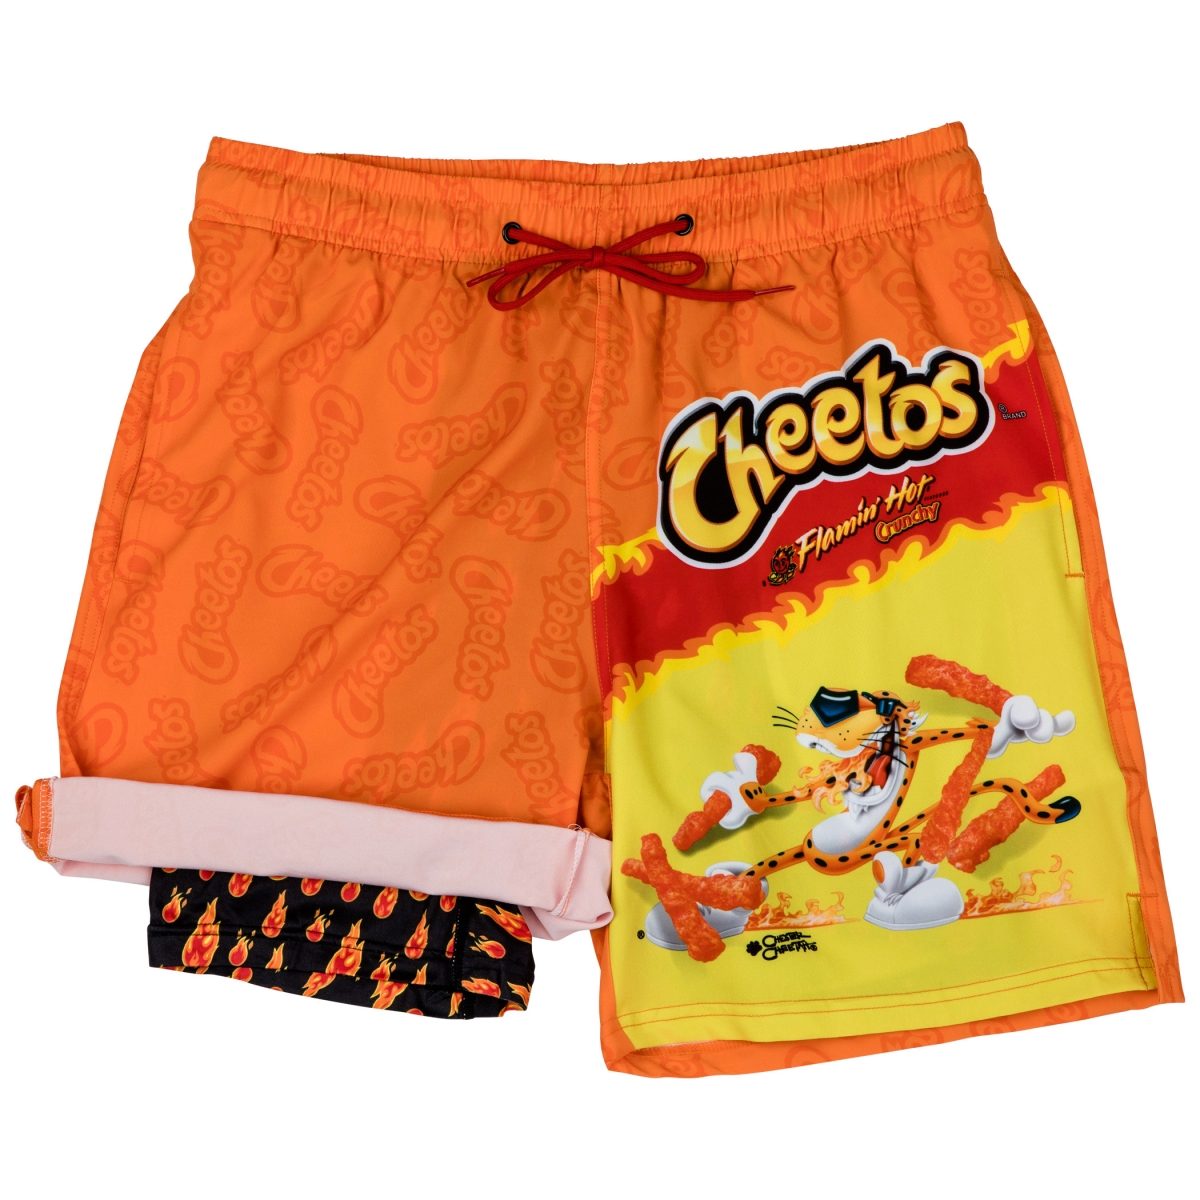 866842-small-28 Flaming Hot Cheetos Bag 6 in. Inseam Lined Swim Trunks, Orange - Small - 28-30 -  Pop Culture, 866842-small(28-